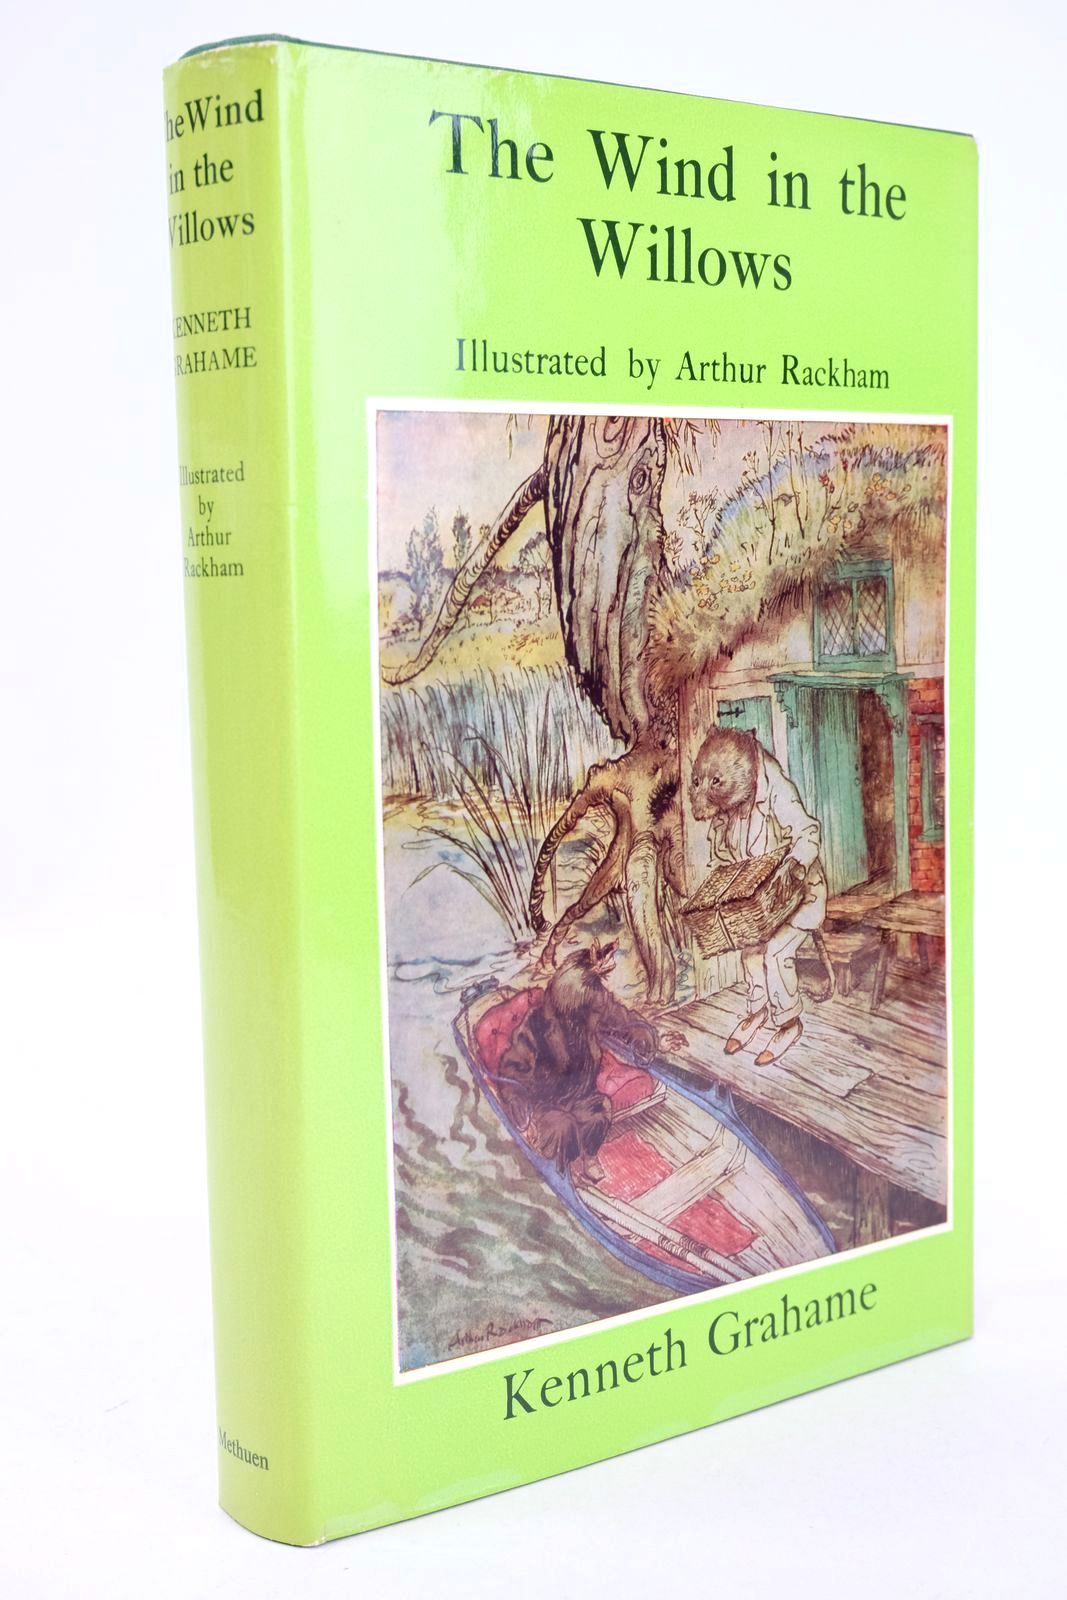 Photo of THE WIND IN THE WILLOWS written by Grahame, Kenneth illustrated by Rackham, Arthur published by Methuen Children's Books (STOCK CODE: 1325457)  for sale by Stella & Rose's Books